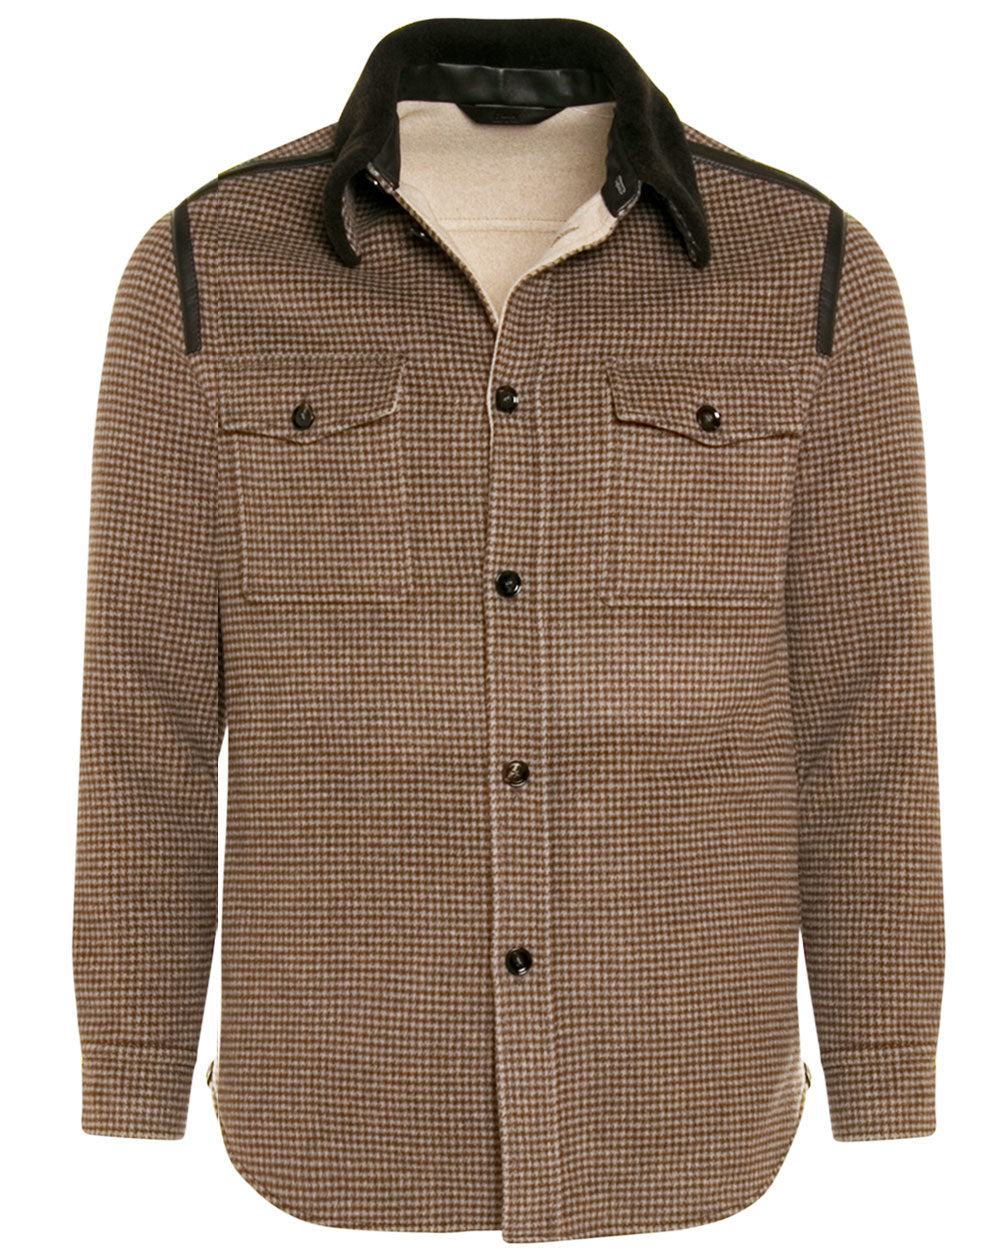 Light Brown and Beige Cashmere Wool Jacket